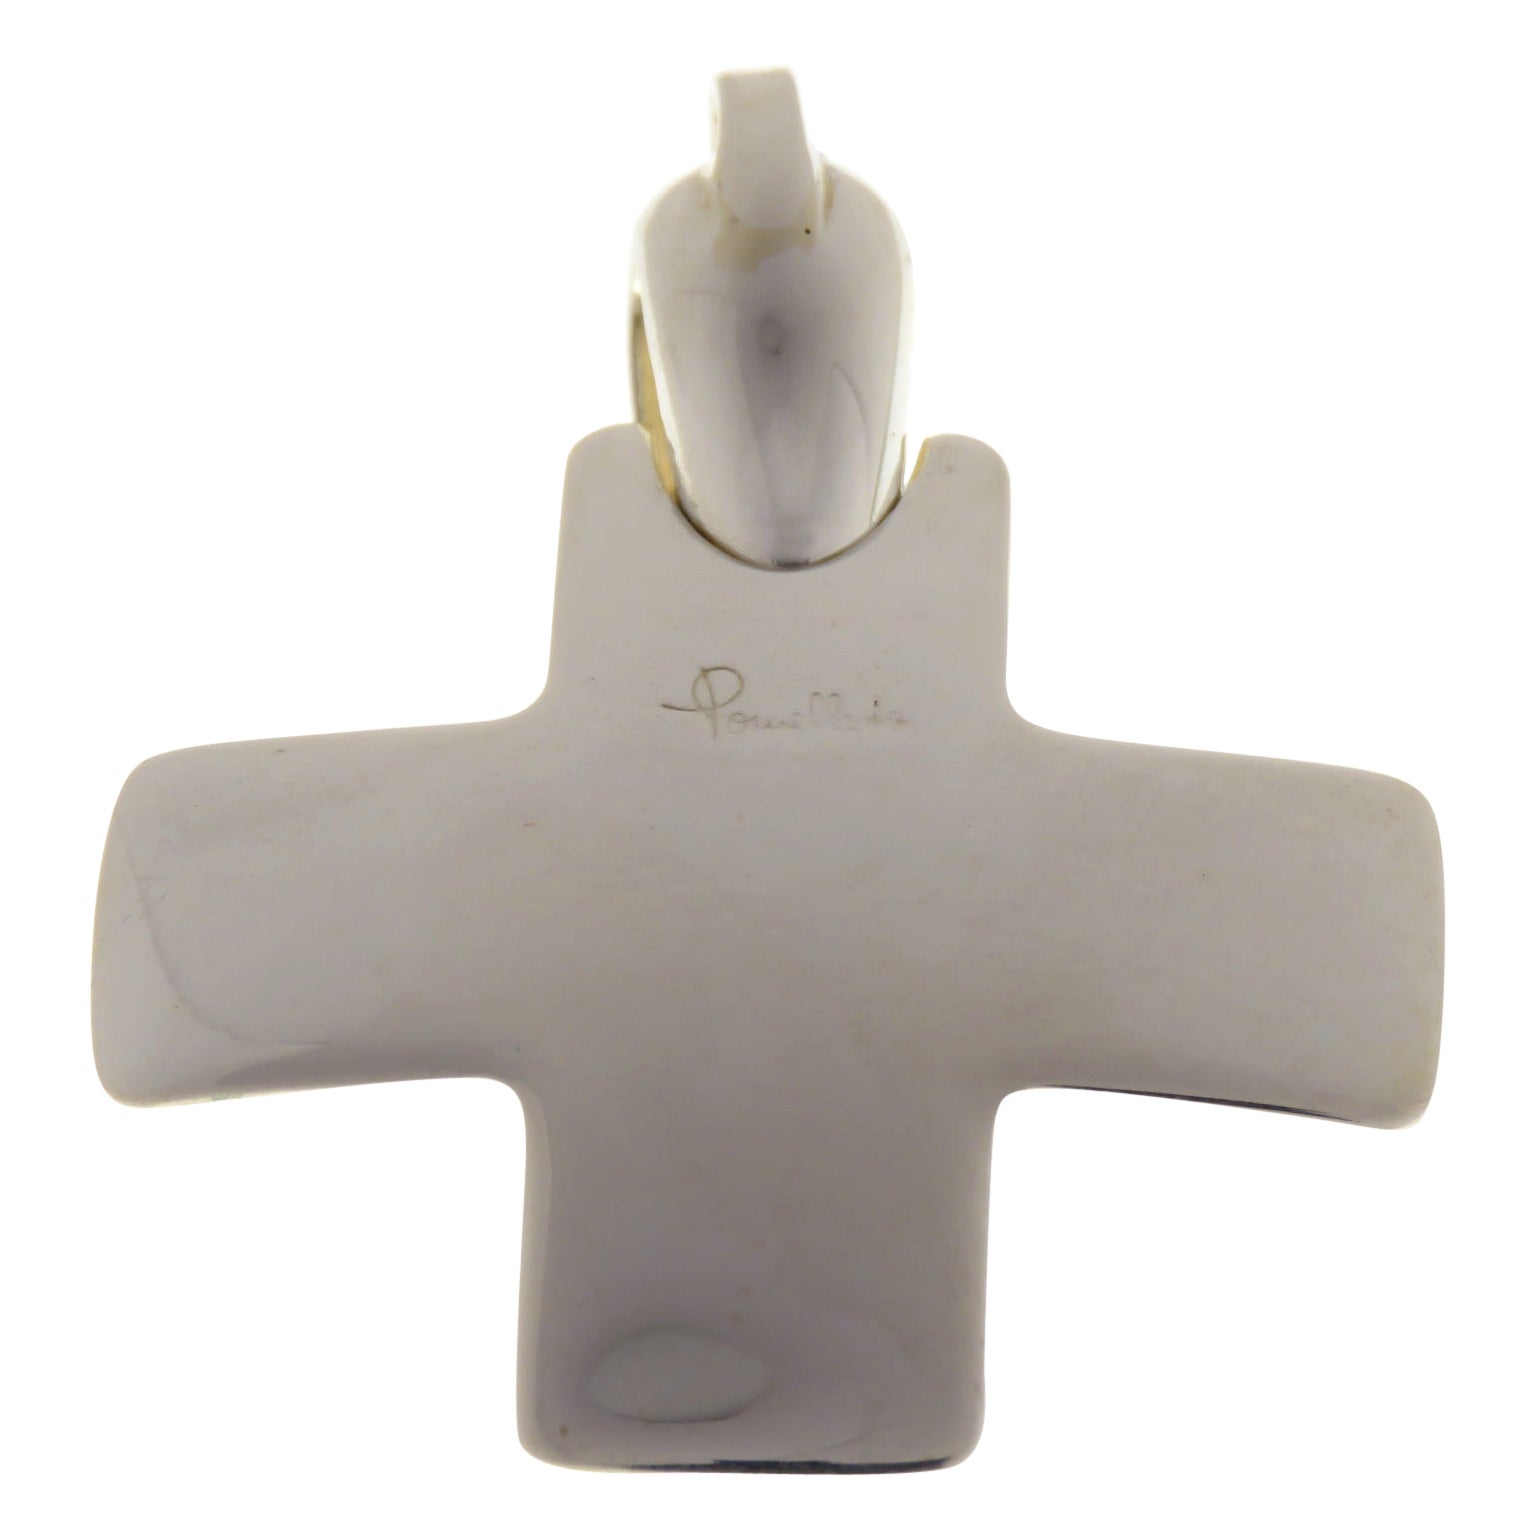 Iconic Sterling Silver Pomellato Cross Pendant Handcrafted in Italy